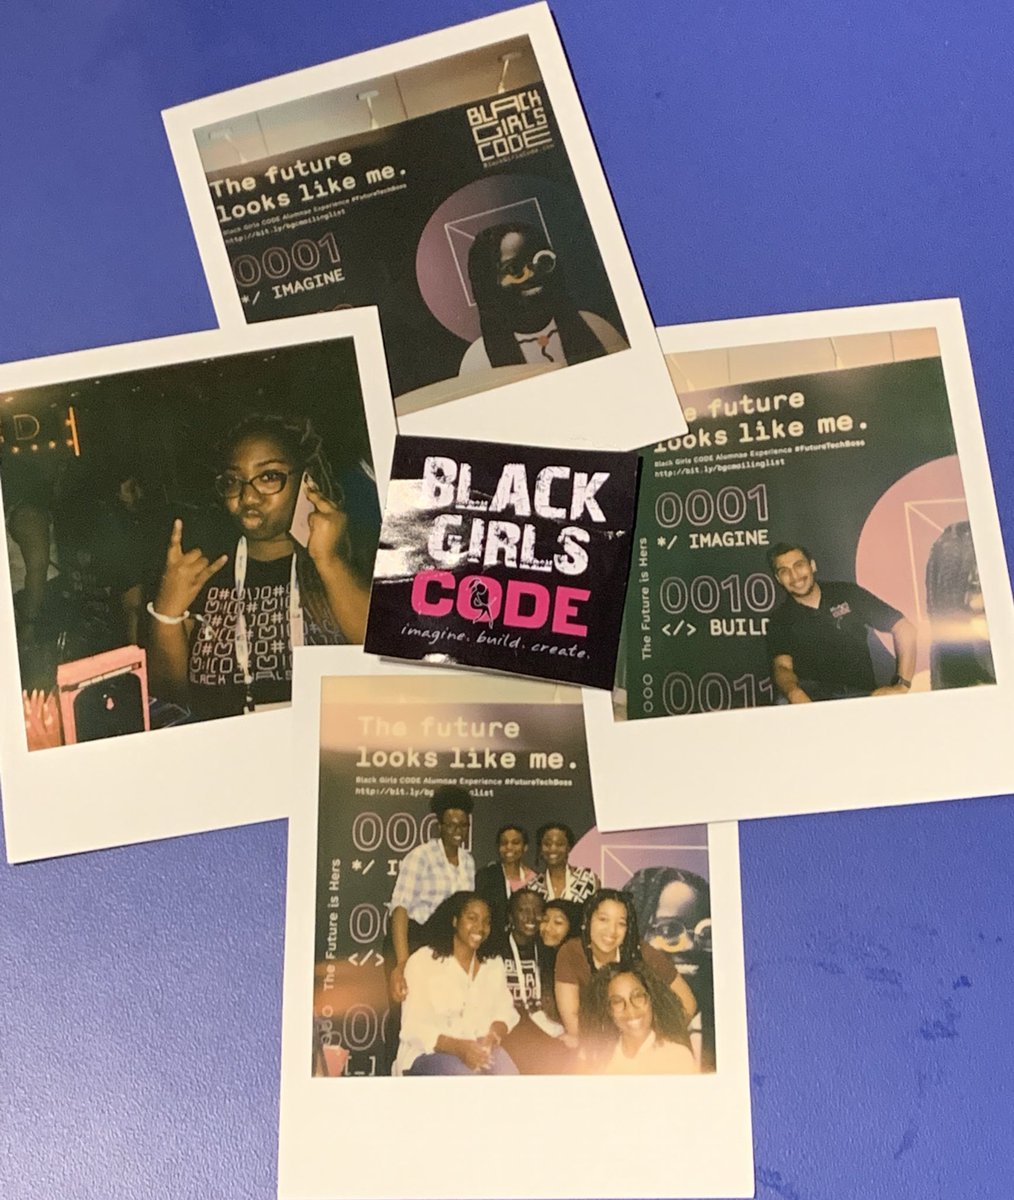 Issa Wrap at the #GHC19 Career Expo! 

@blackgirlscode showed up, and showed out 🙌🏽

Remember to continue to sign up to Volunteer (tinyurl.com/volunteerwithb…) and to support our girls all around the nation. #FutureTechBoss